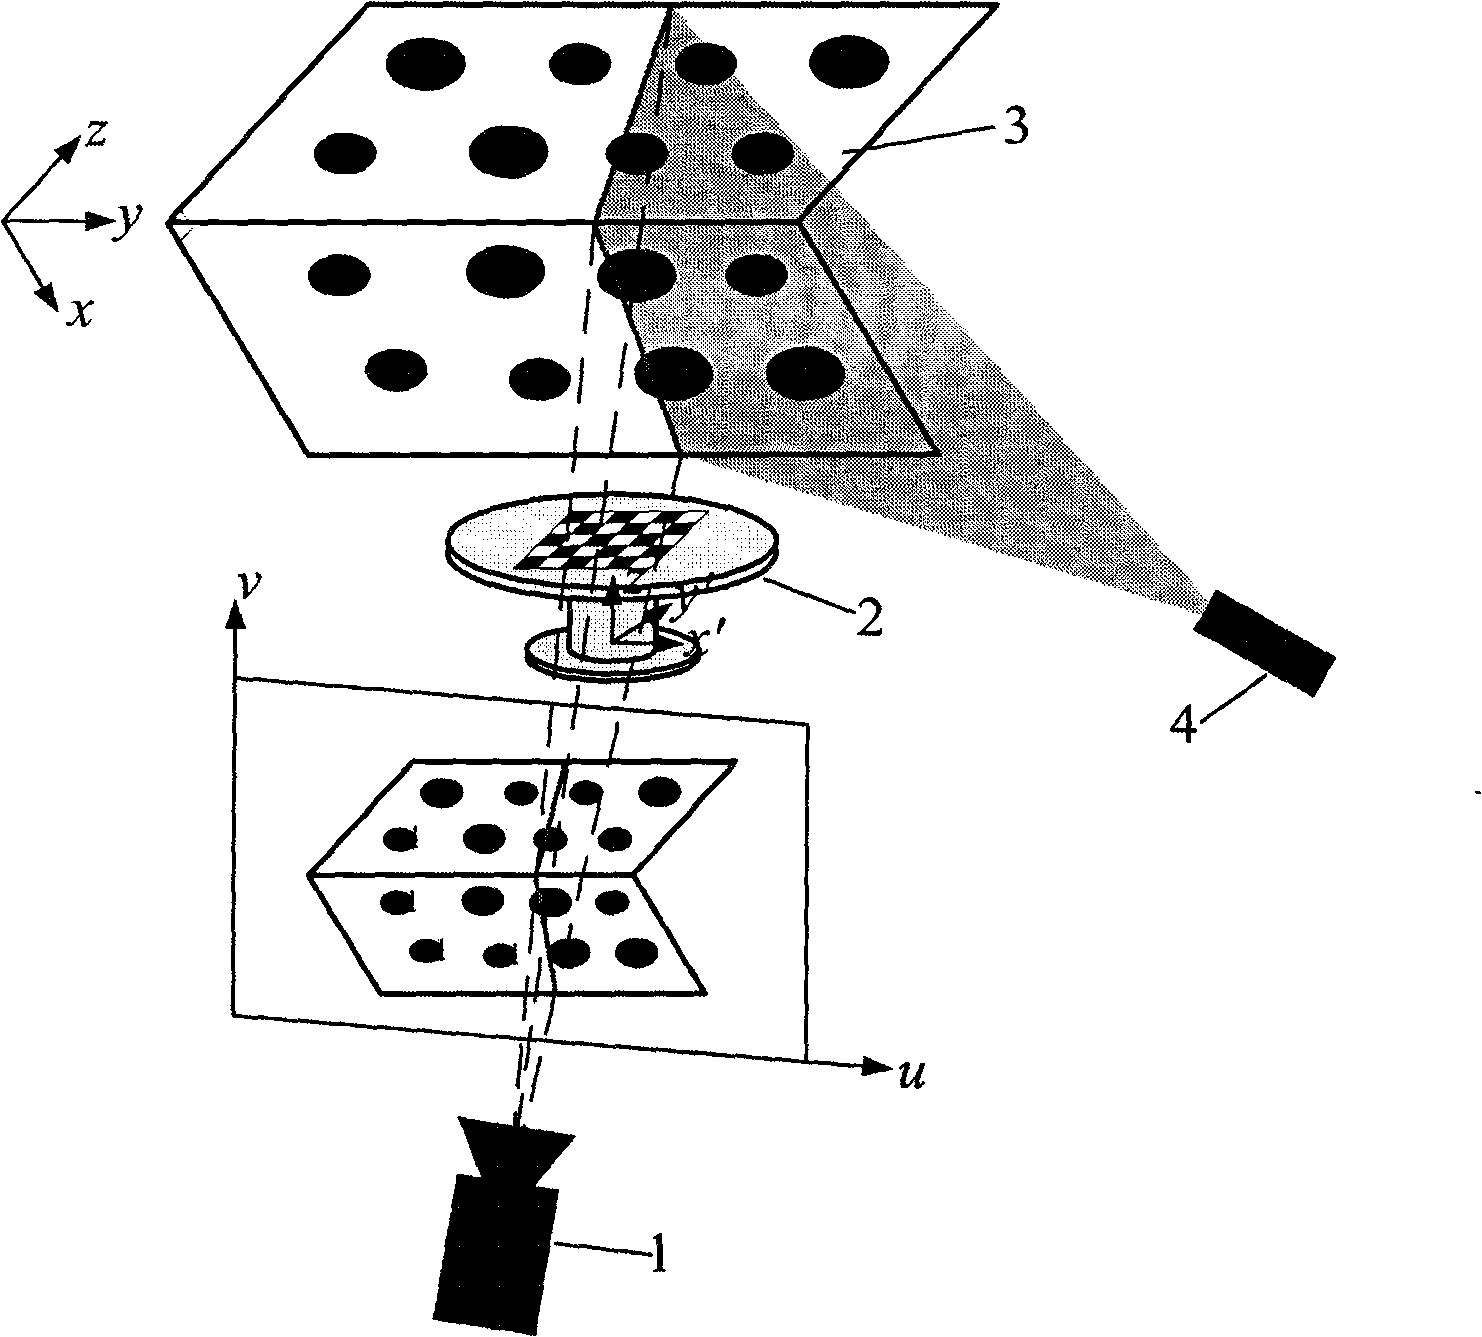 Scanning system and method for three-dimensional images